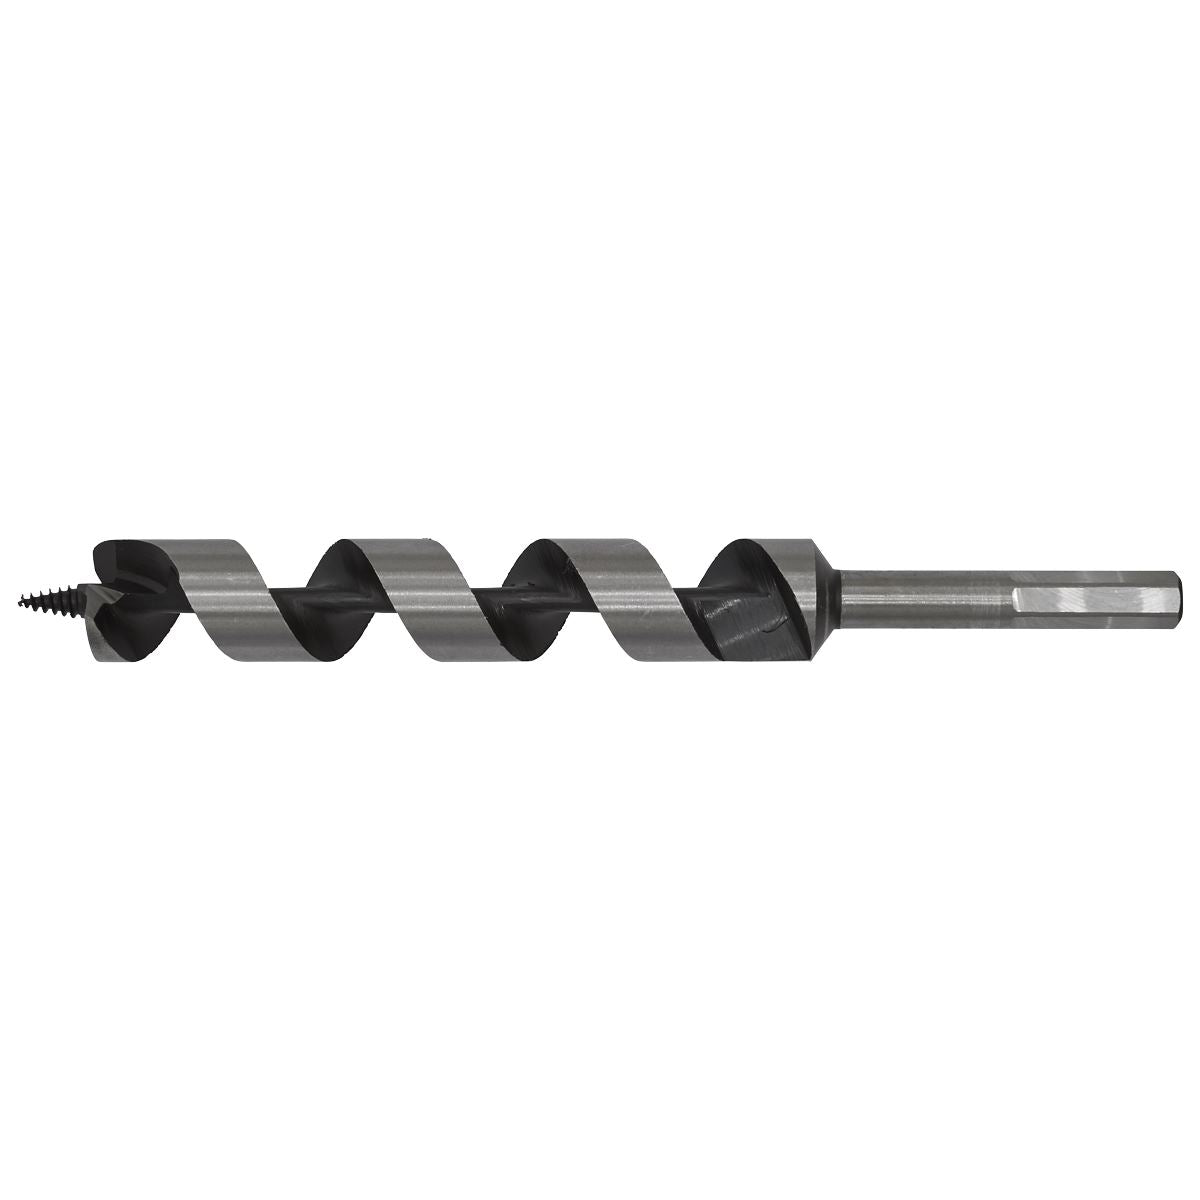 Worksafe by Sealey Auger Wood Drill Bit 25mm x 235mm